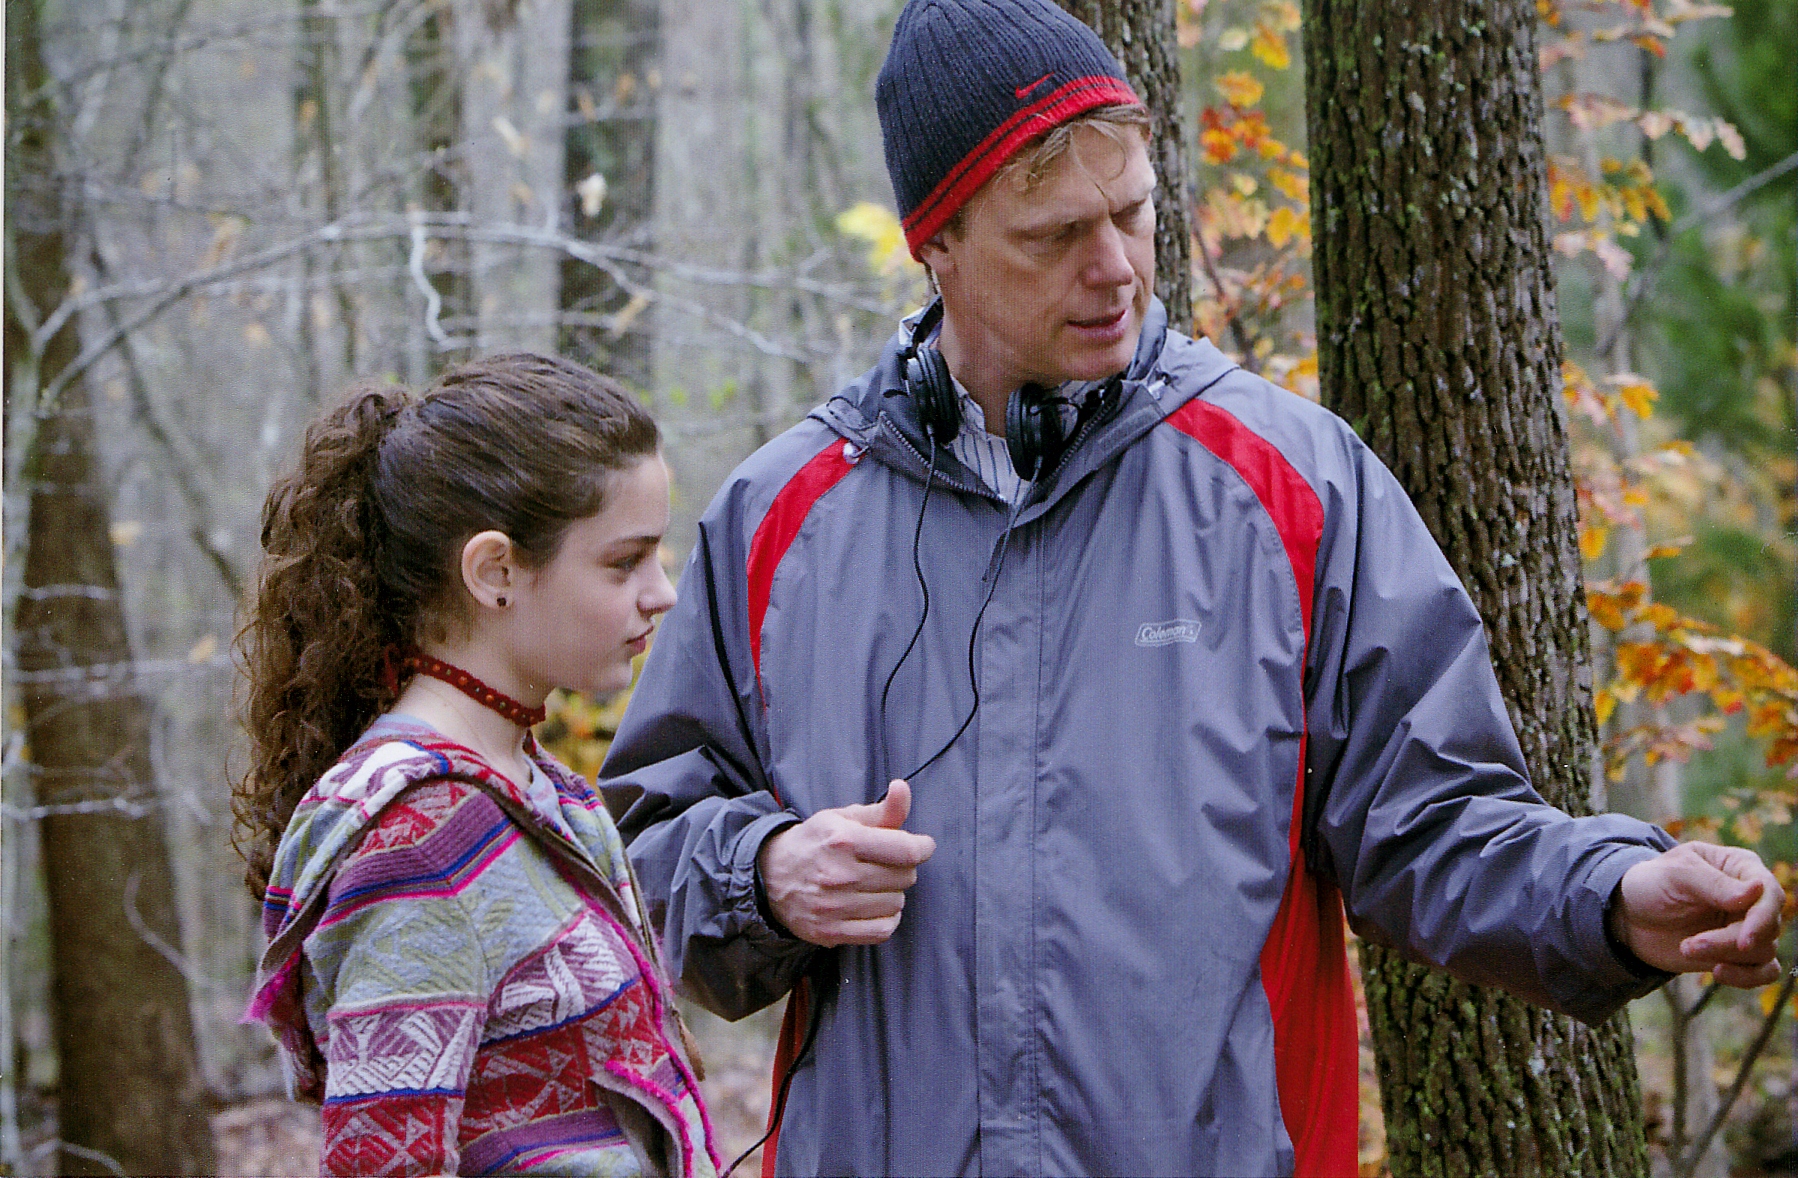 Behind The Scenes photo of Dir. Peter Hedges and Odeya Rush on the set of The Odd Life Of Timothy Green